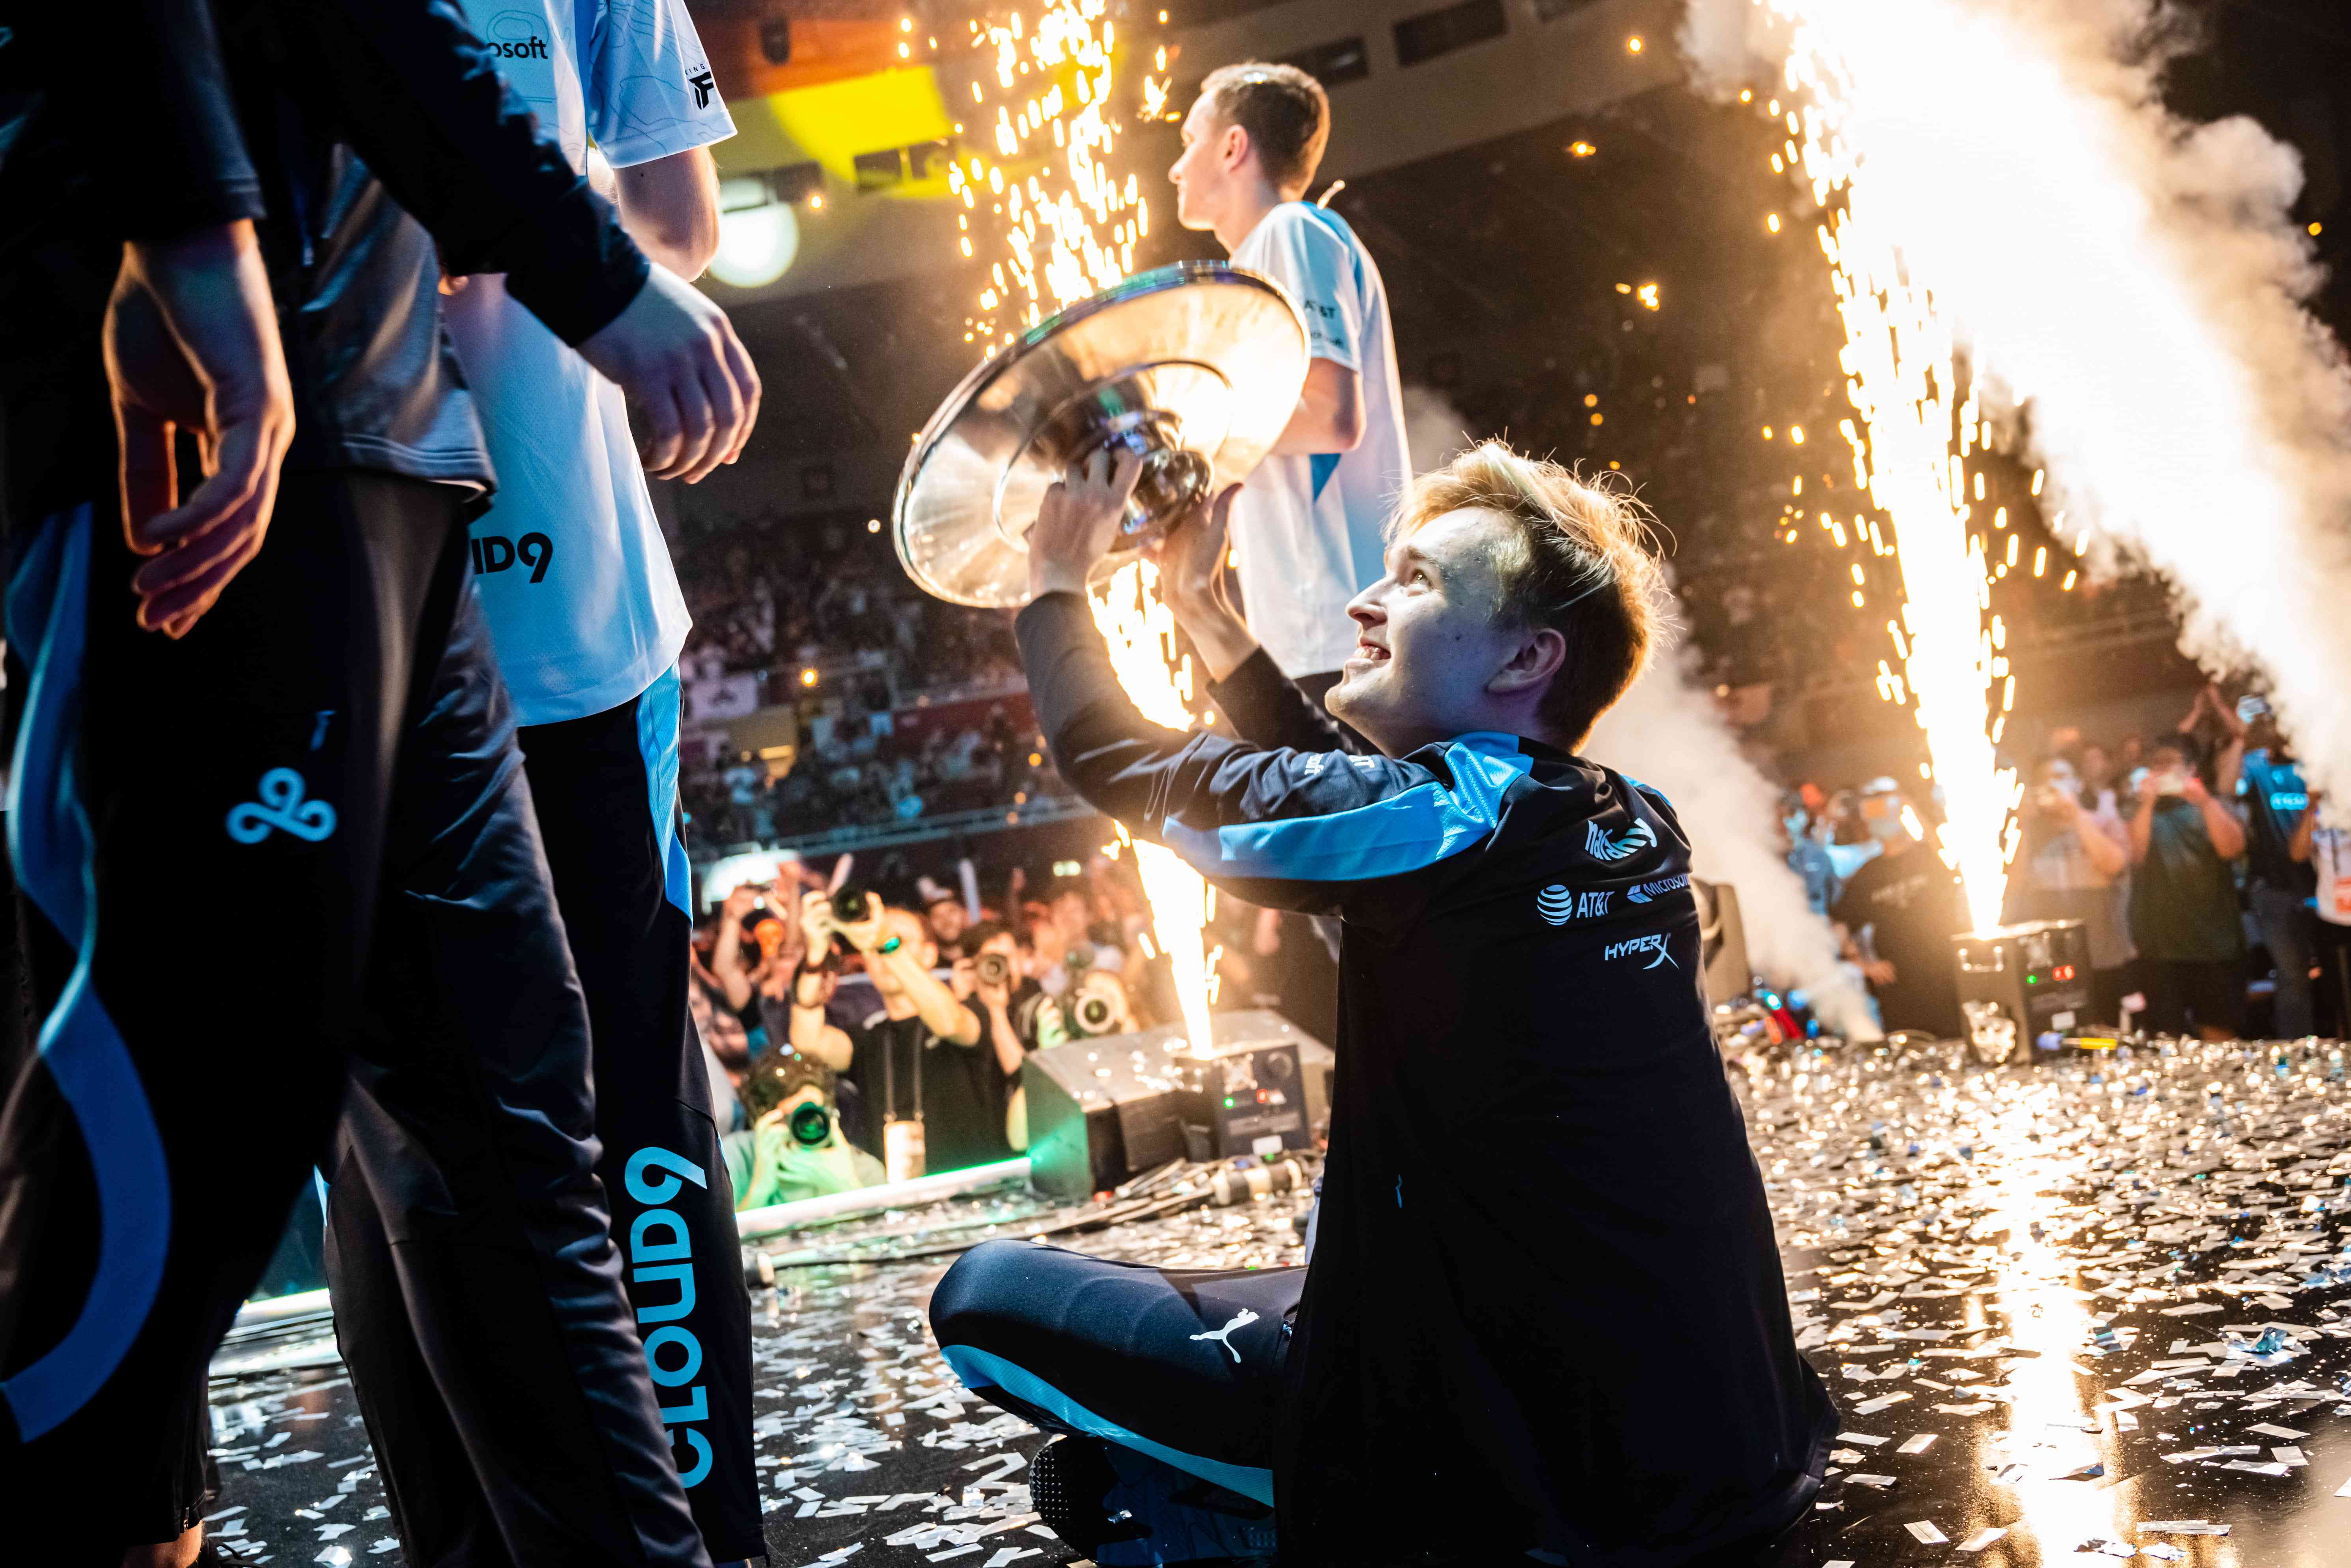 Cloud9’s win at IEM Dallas would end up being nafany’s only tier-one LAN title (Image Credits: ESL | Eric Ananmalay)